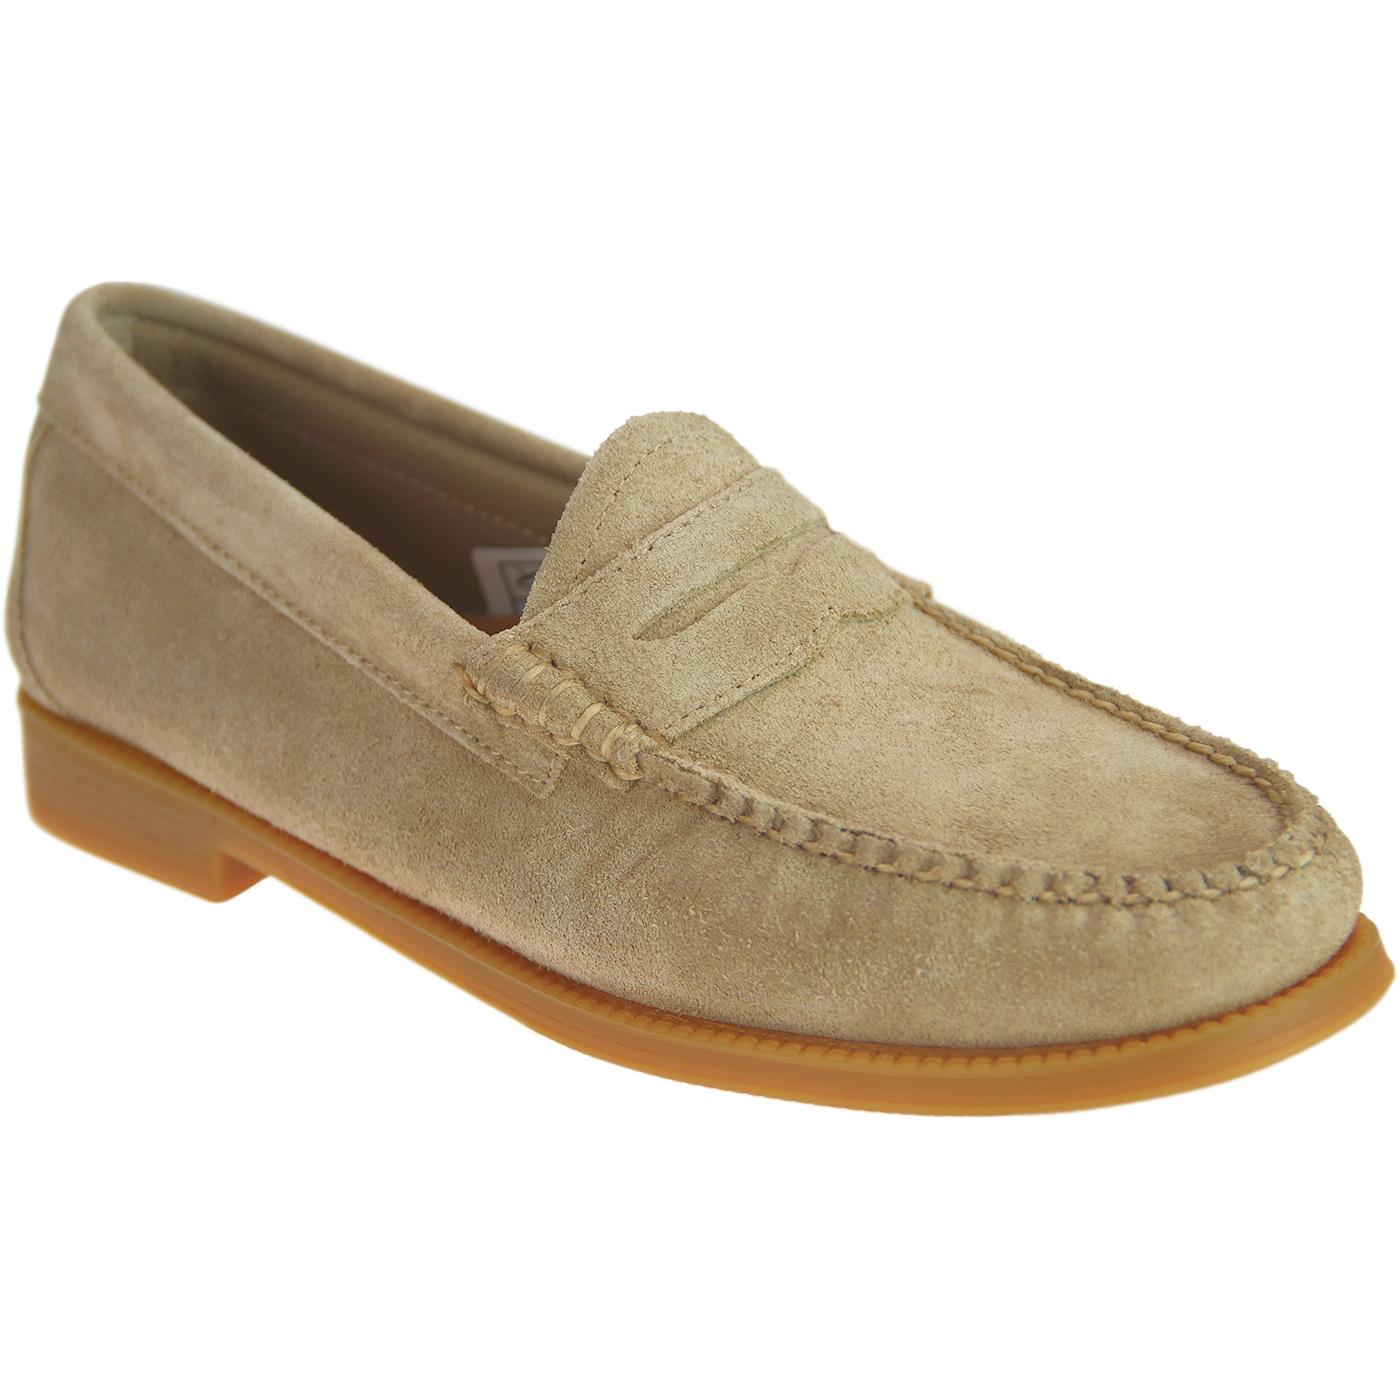 BASS WEEJUNS Women's Retro Suede Penny loafers